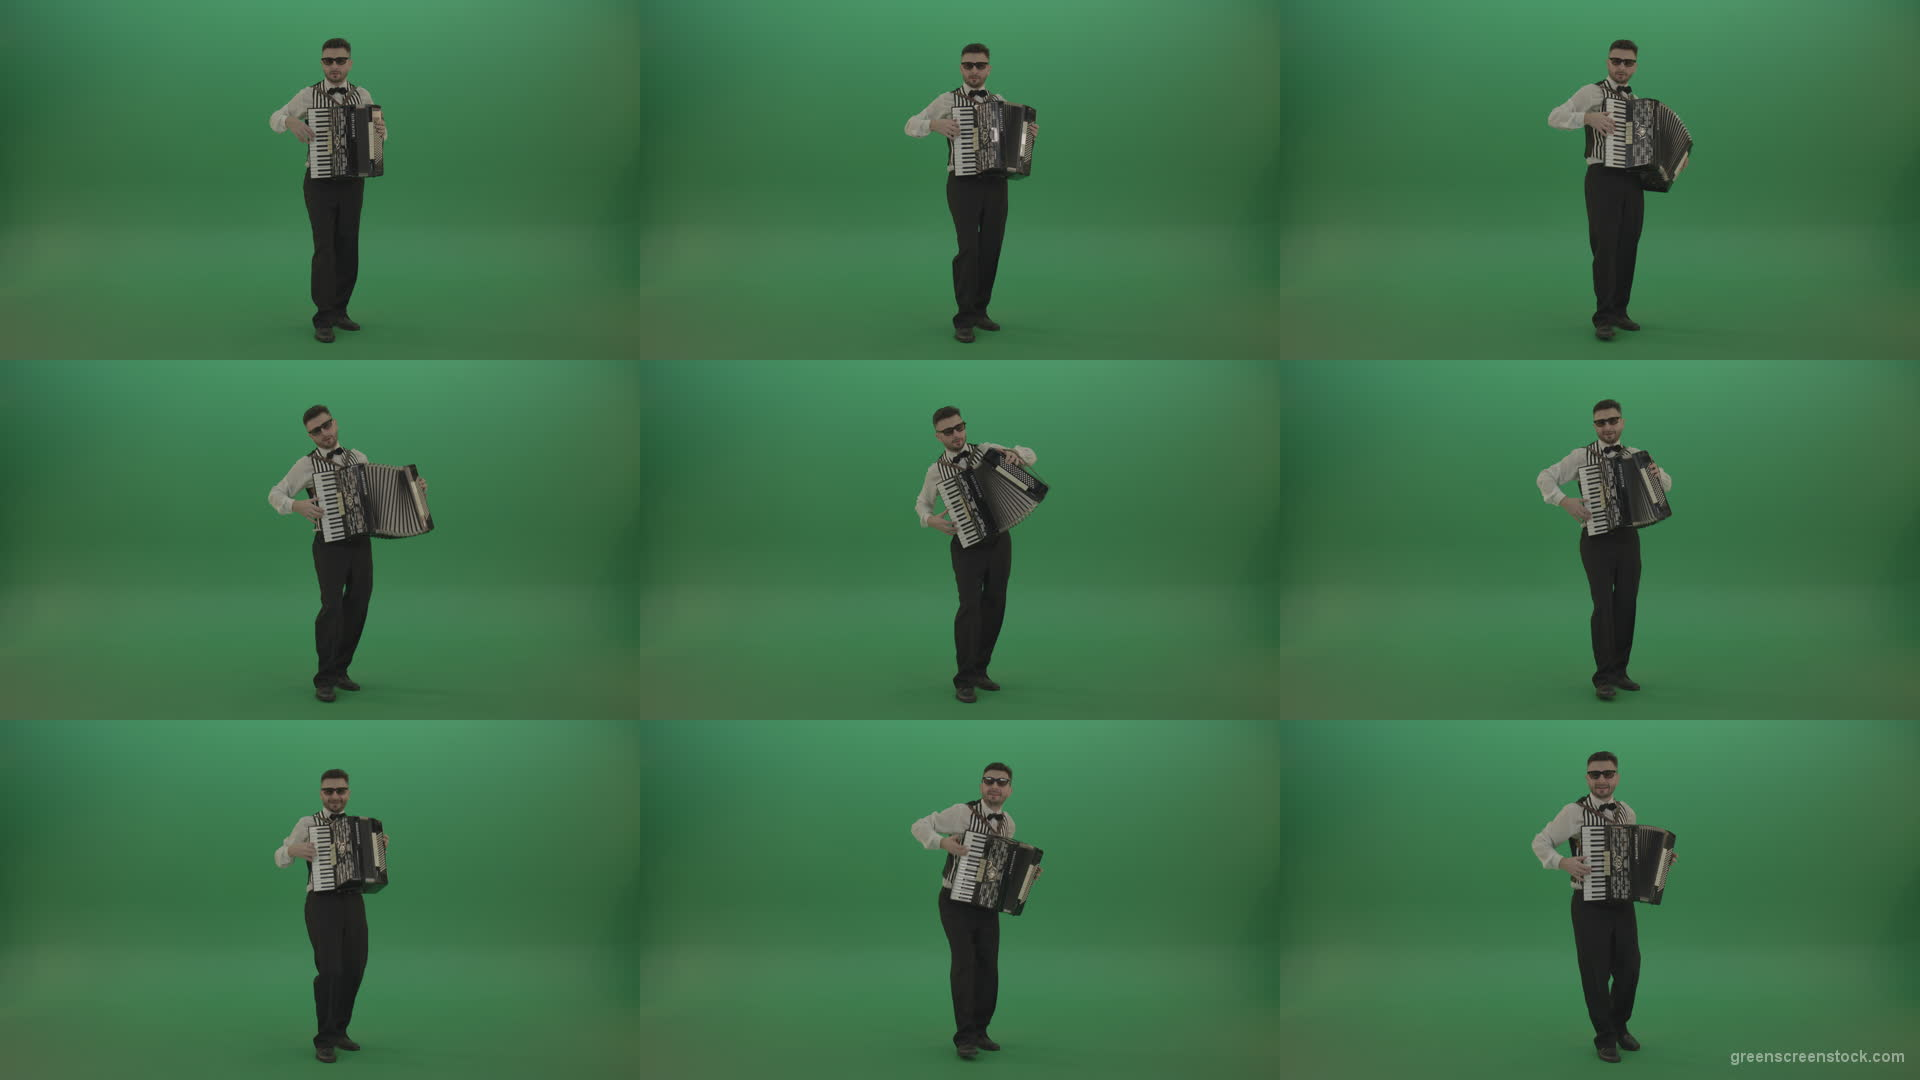 Full-sized-man-playing-Accordions-isolated-on-green-screen Green Screen Stock